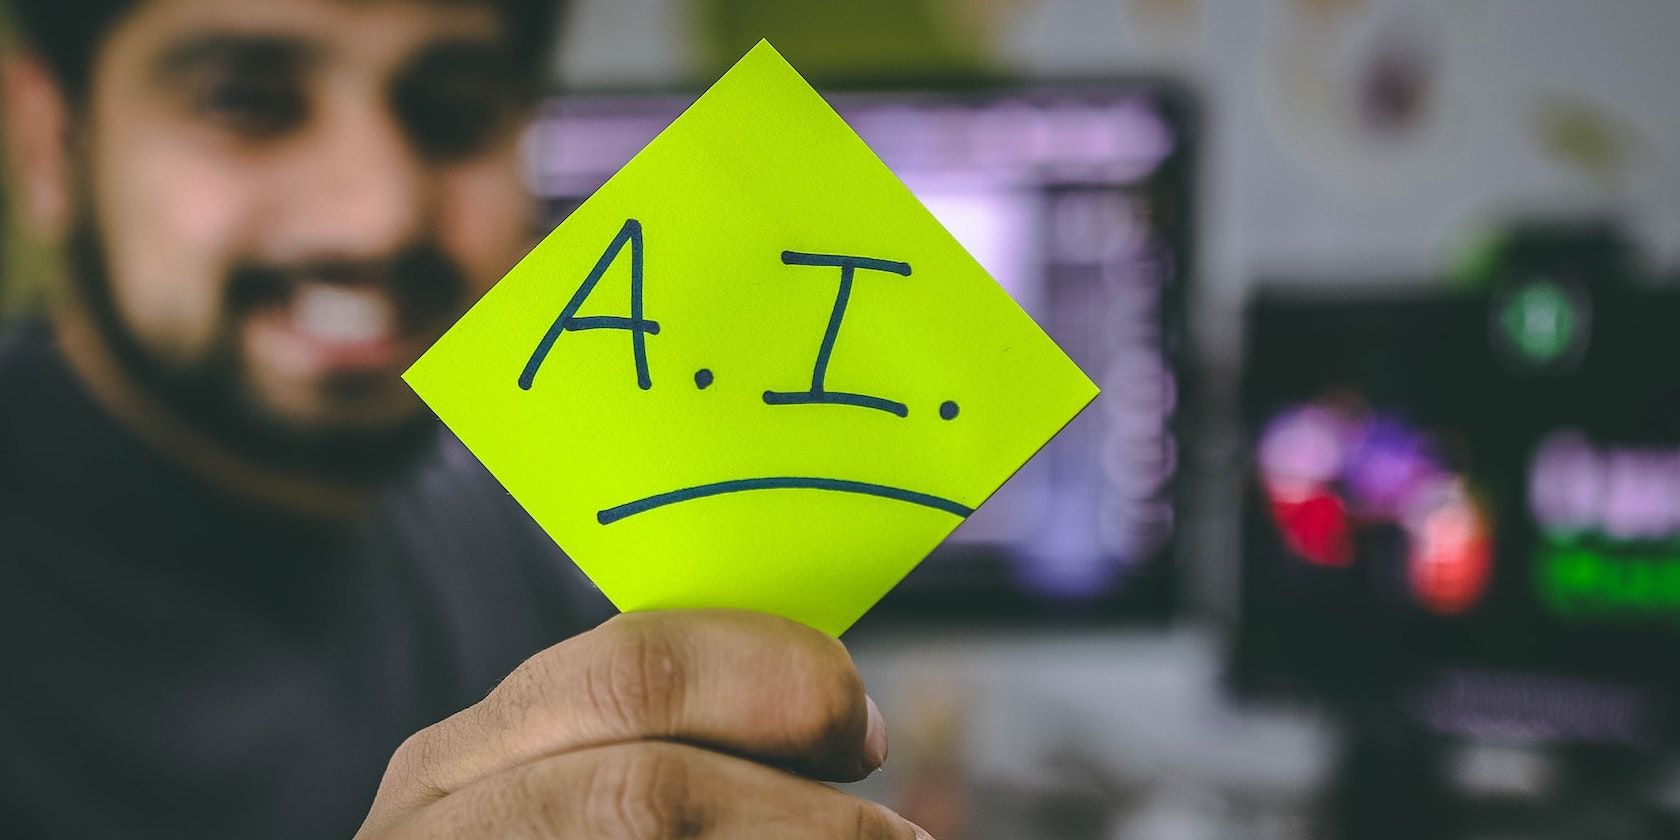 A hand holding a note with A.I written on it.